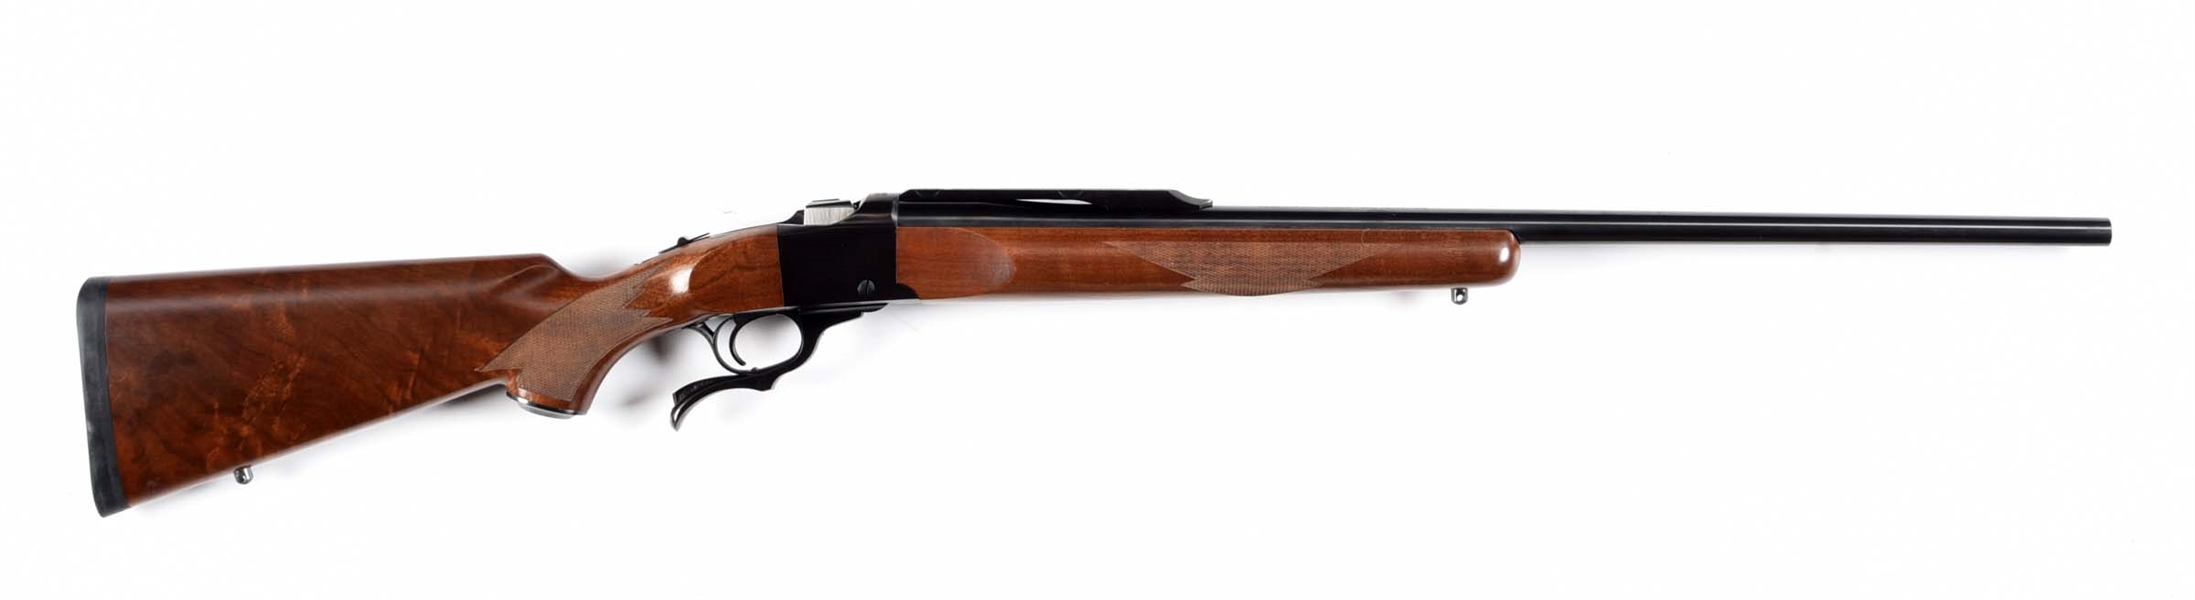 (M) BOXED RUGER NO. 1 SINGLE SHOT RIFLE IN .218 BEE. 